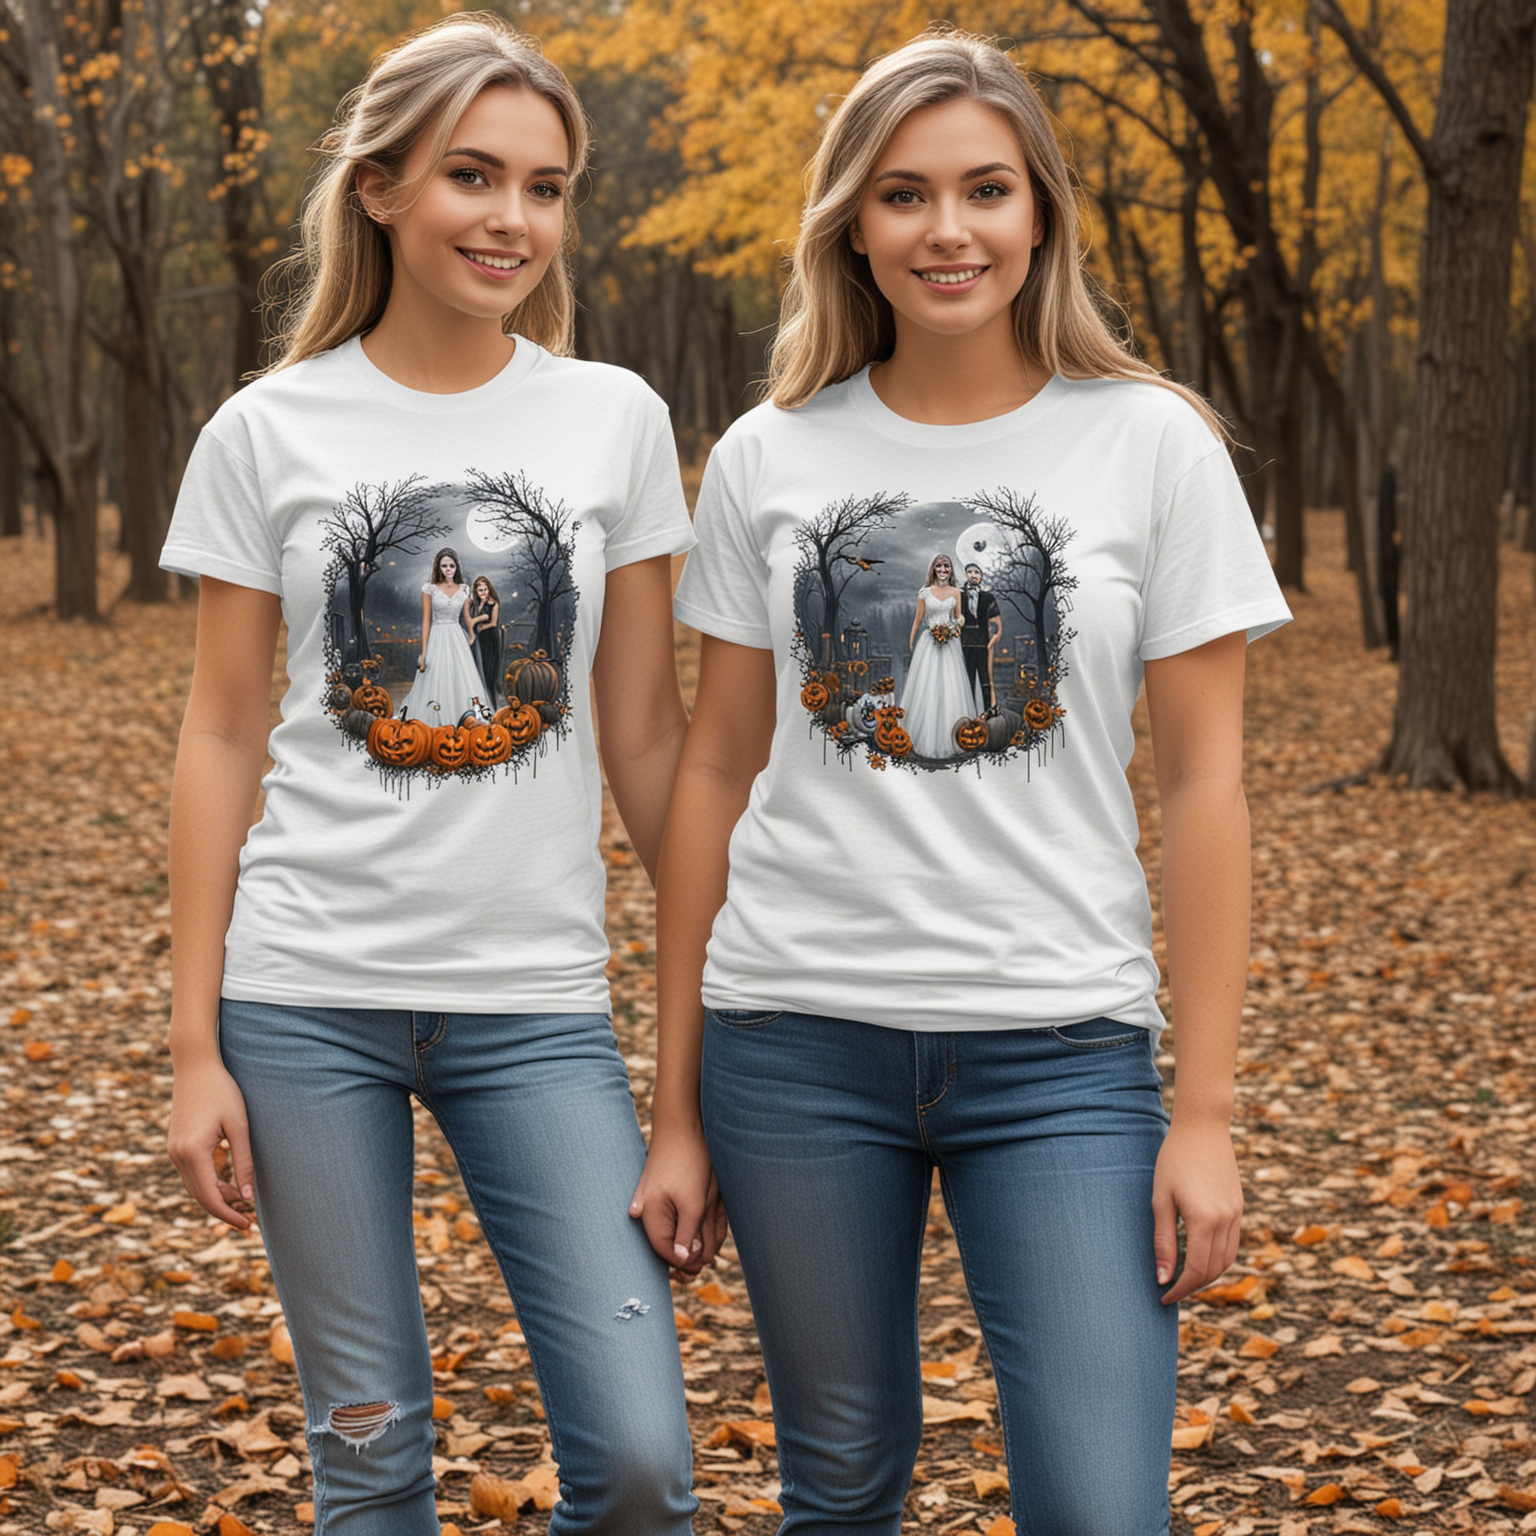 MotherDaughter Duo Modeling White Tees at Outdoor Halloween Wedding